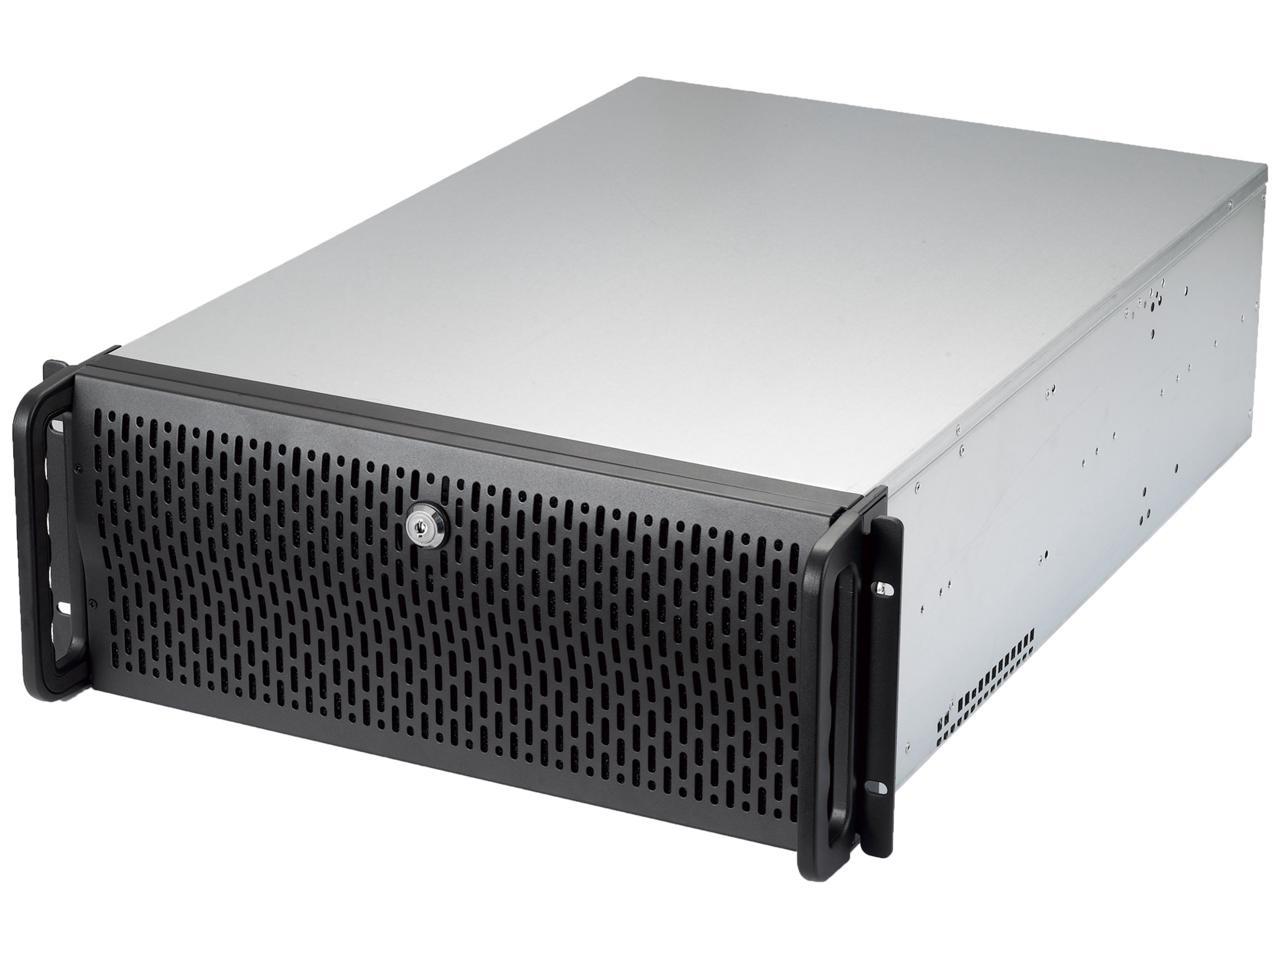 Rosewill RSV-L4500U 4U Server Chassis Rackmount Case | 15 3.5" HDD Bays | E-ATX Compatible | 6 Front 120mm Fans, 2 Rear 80mm Fans | USB 3.0, USB 2.0 | Front Panel Lock and Key | Silver/Black